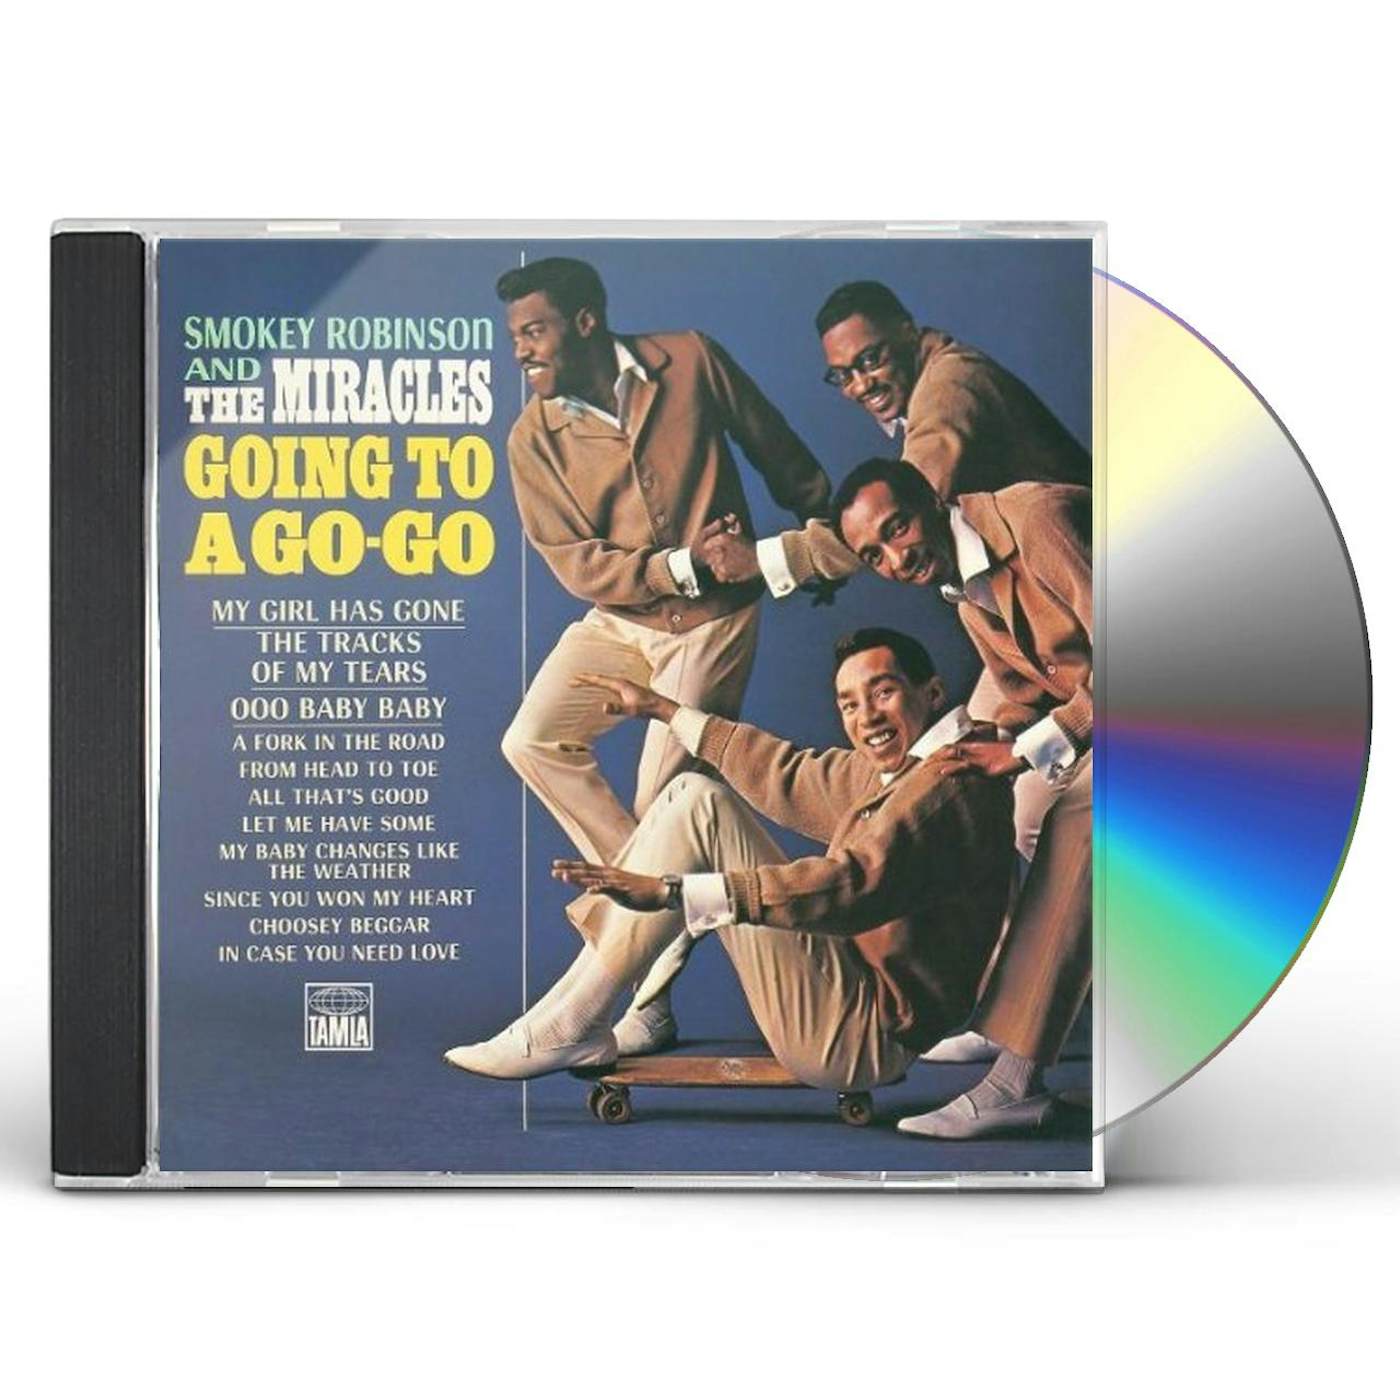 Smokey Robinson & The Miracles GOING TO GO-GO / AWAY WE GO-GO CD